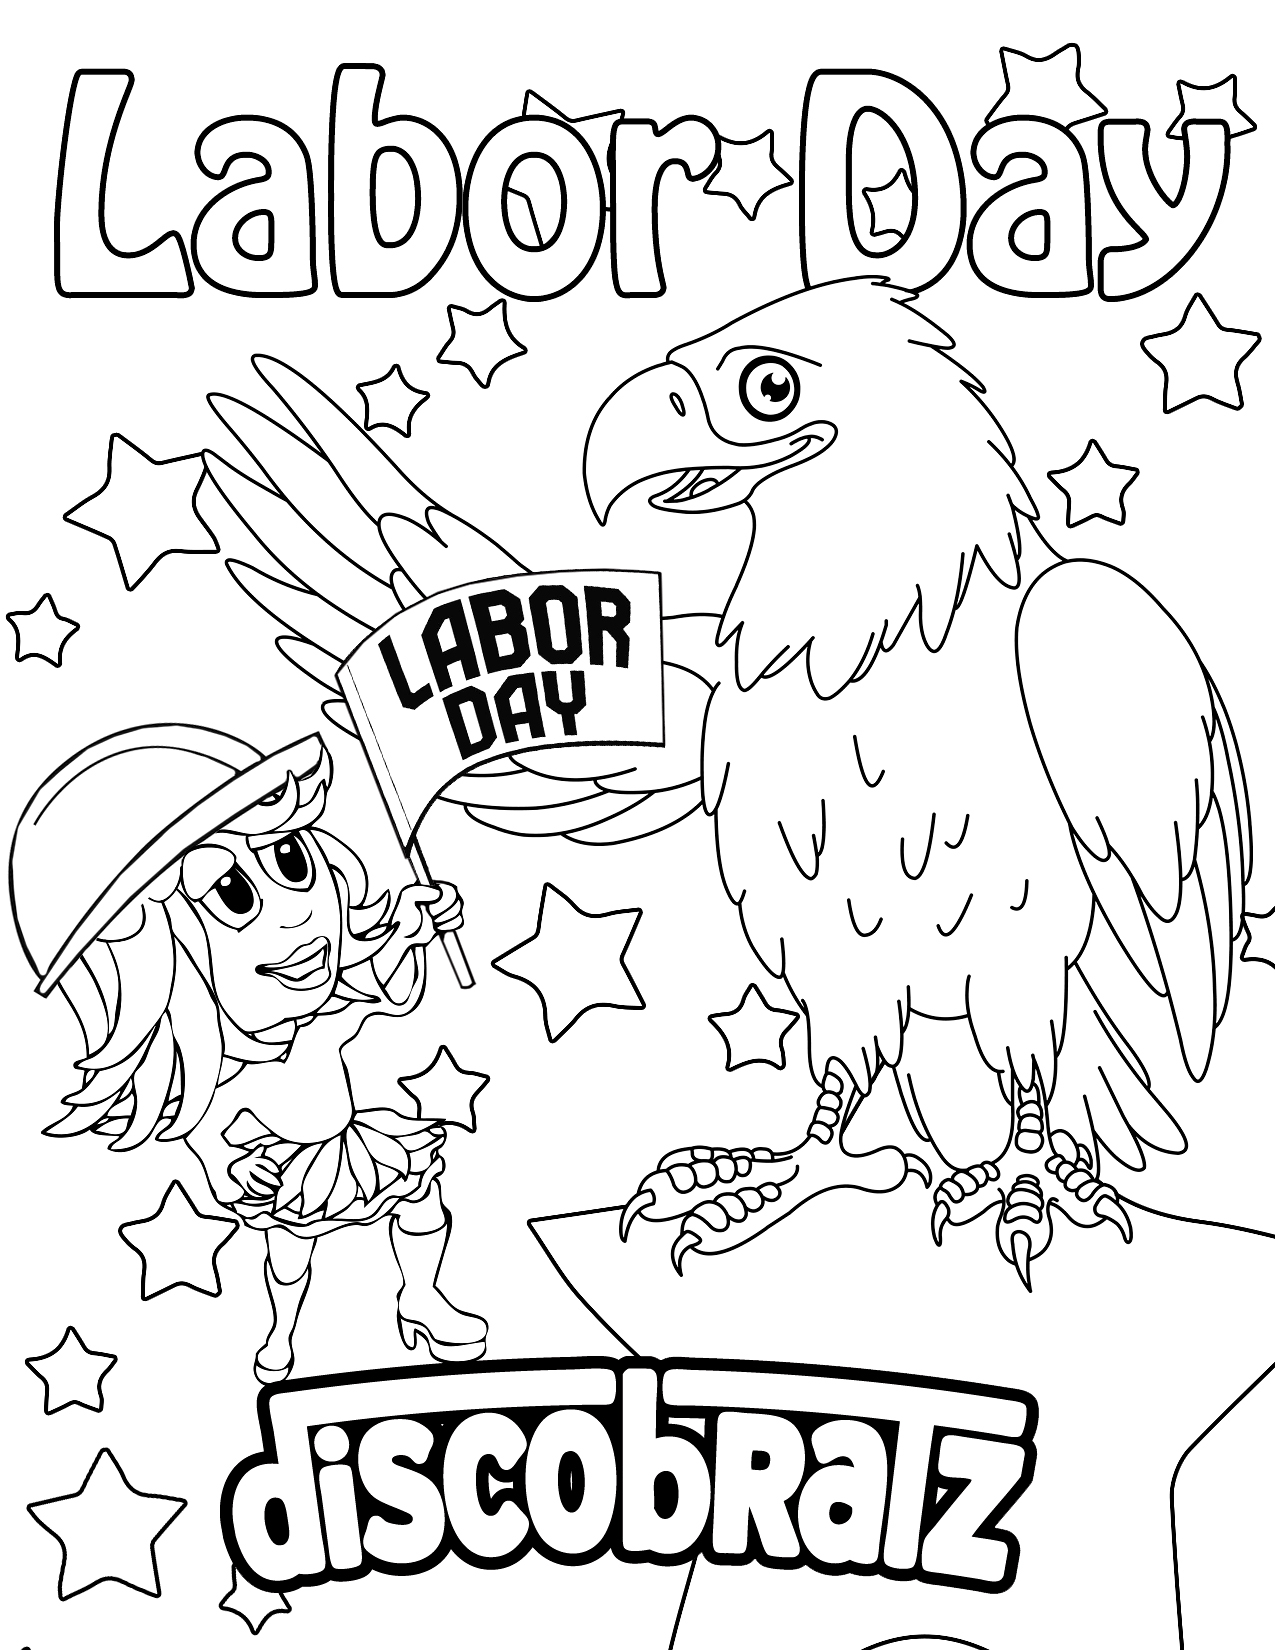 labor day on line coloring pages - photo #4